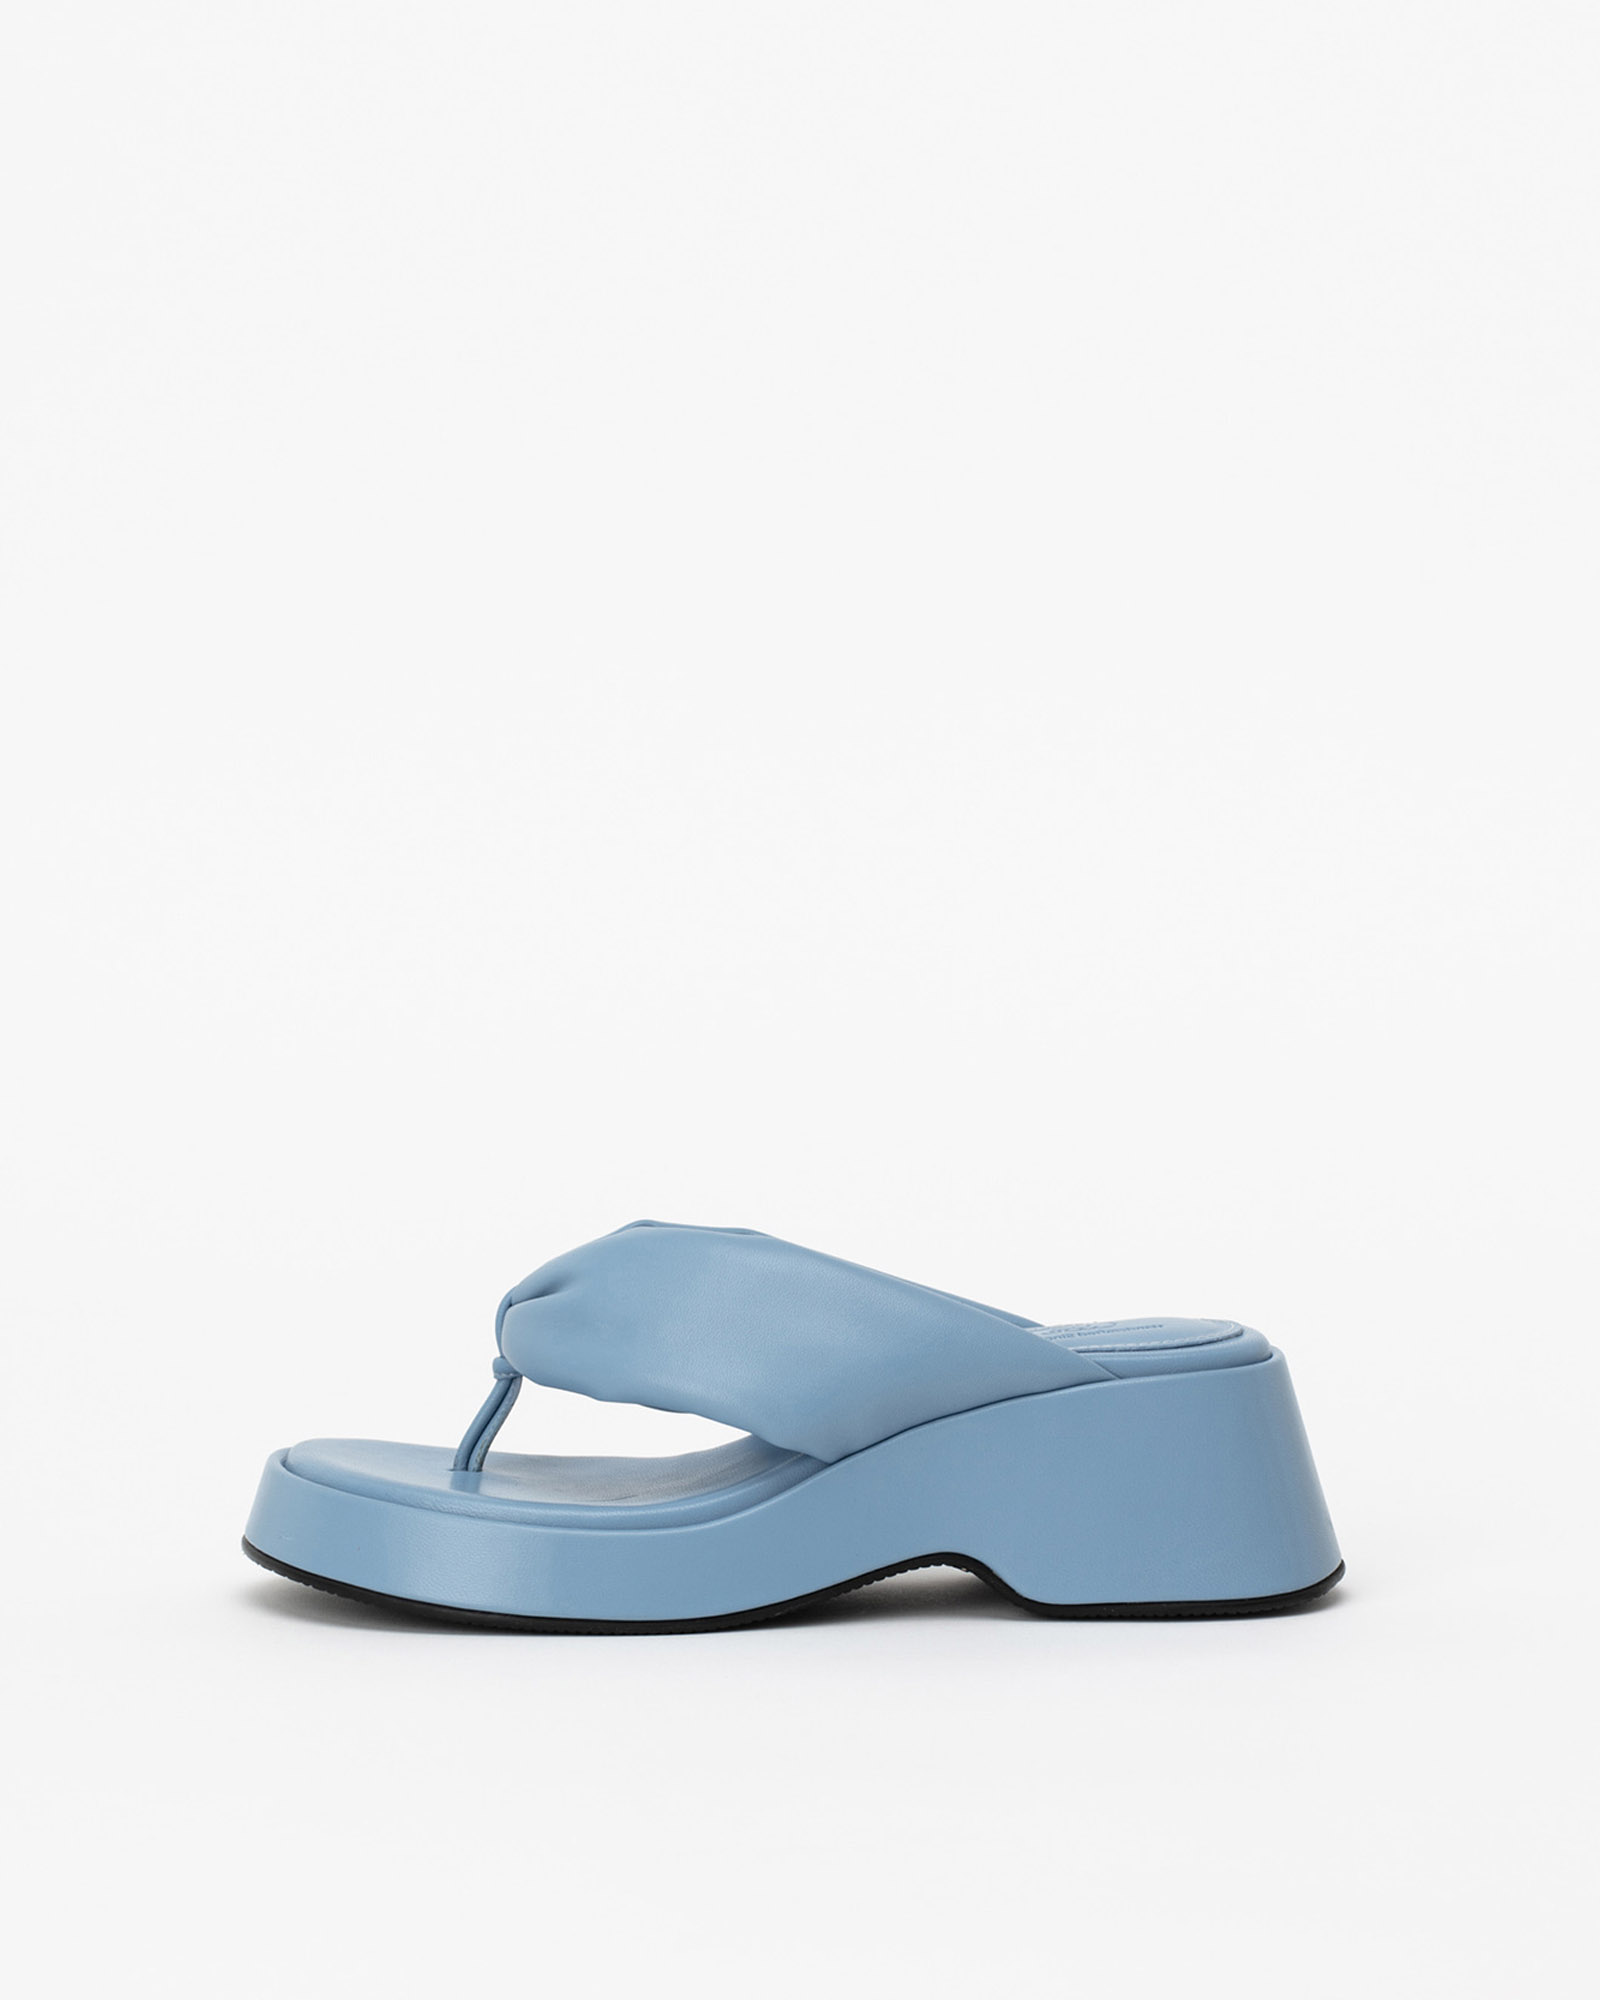 Potran Padded Thong Platform Sandals in Airy Blue